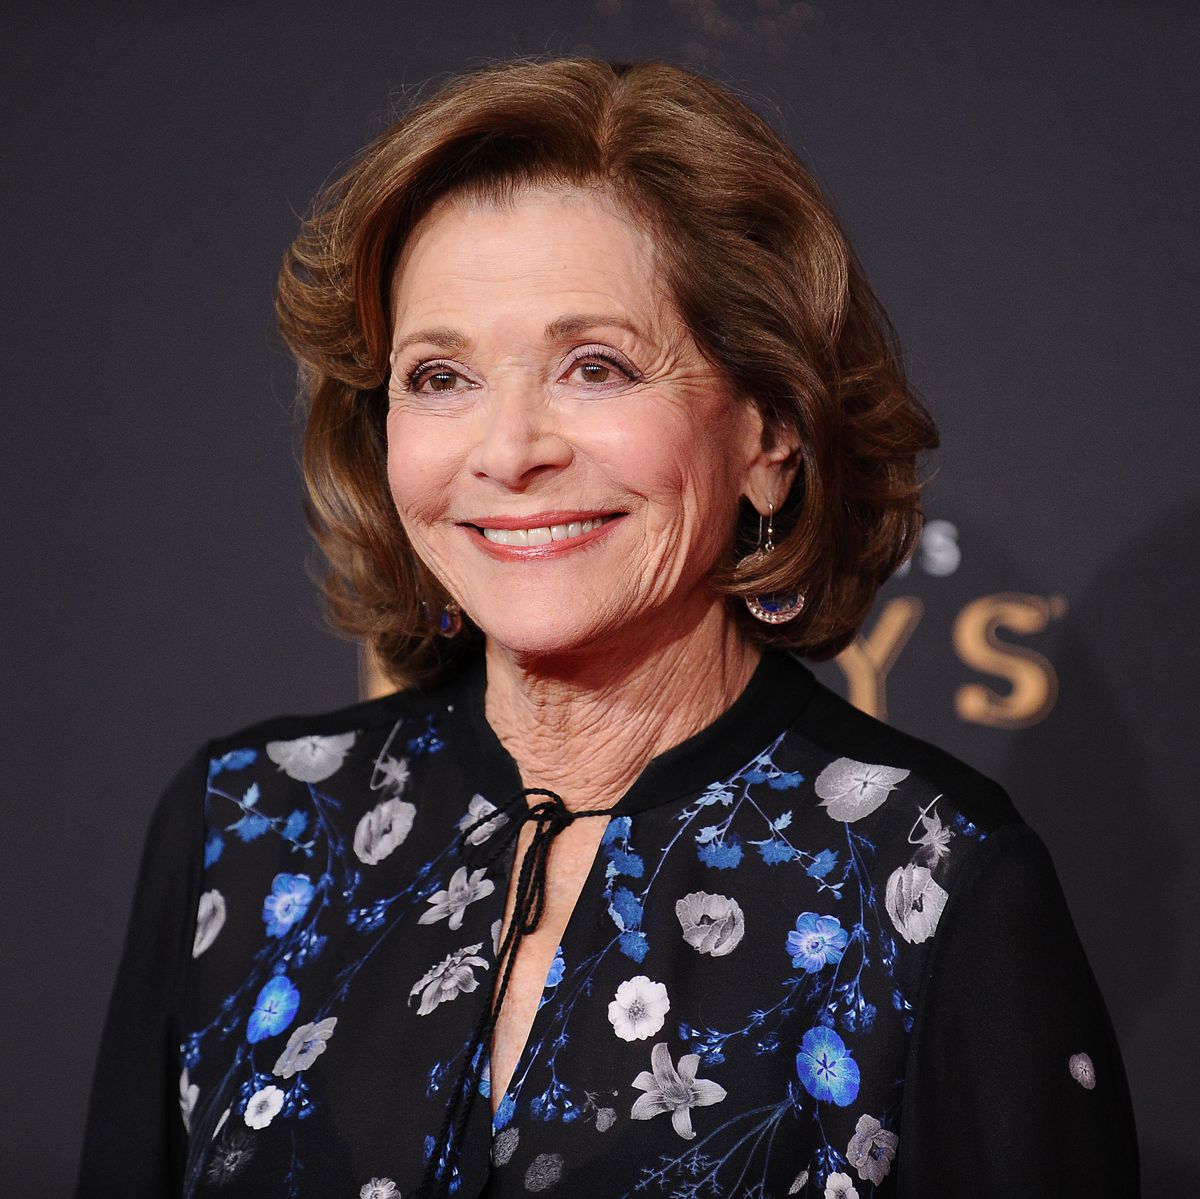 los angeles, ca   september 09 actress jessica walter attends the 2017 creative arts emmy awards at microsoft theater on september 9, 2017 in los angeles, california  photo by jason laverisfilmmagic